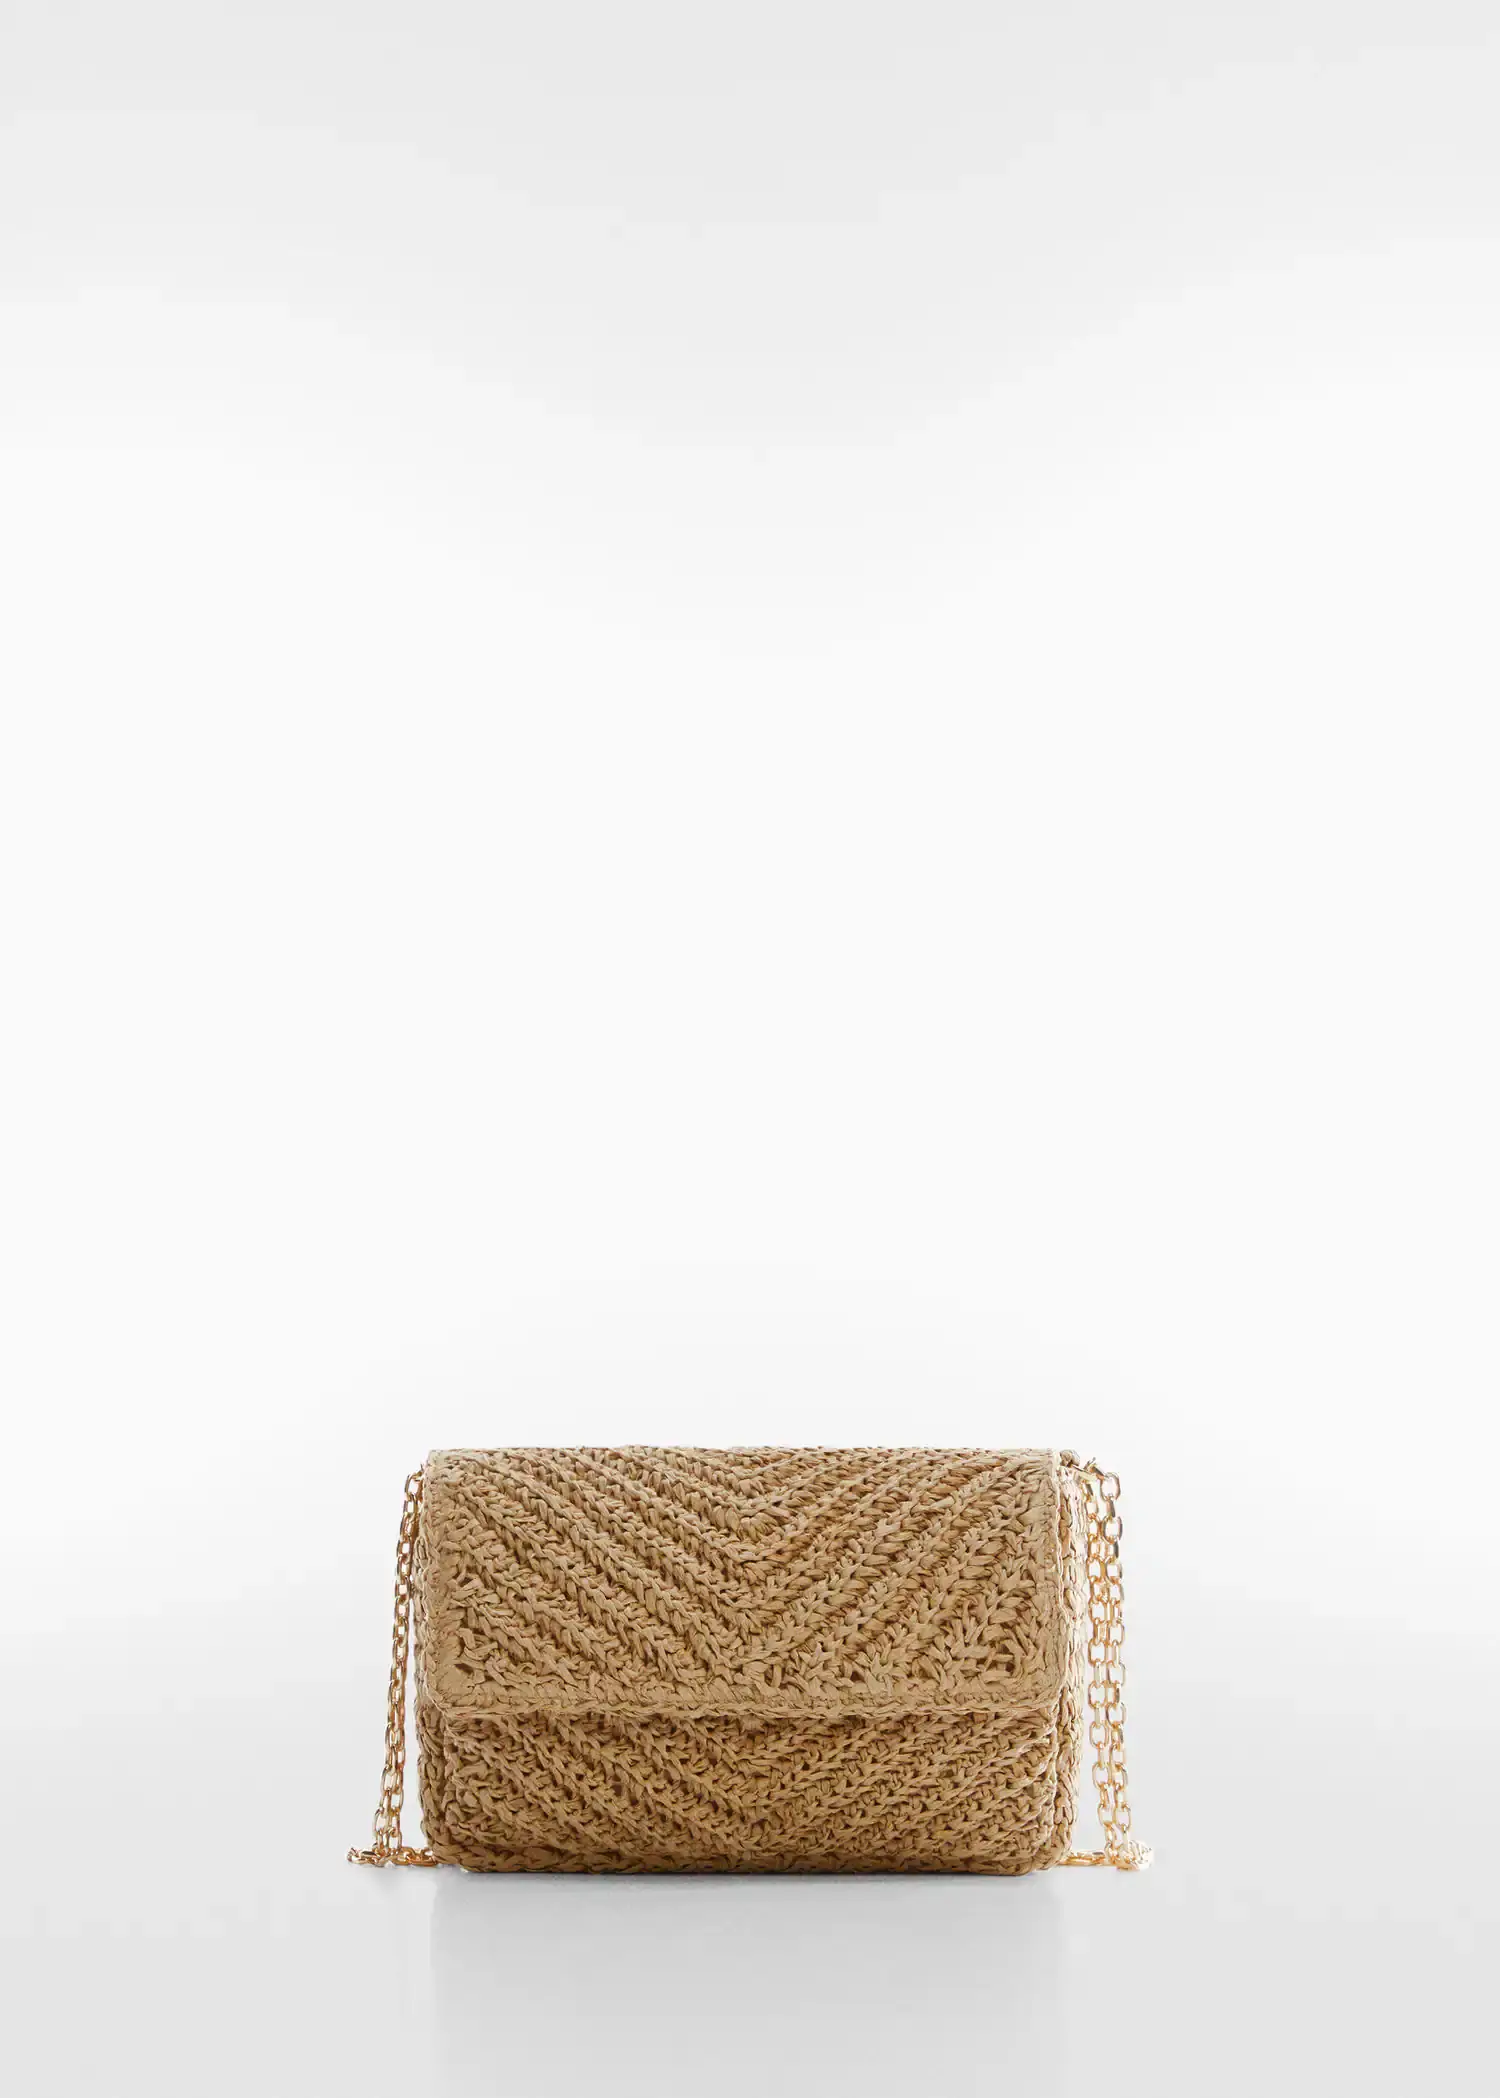 Mango Natural fibre bag with flap. a tan purse sitting on top of a white table. 